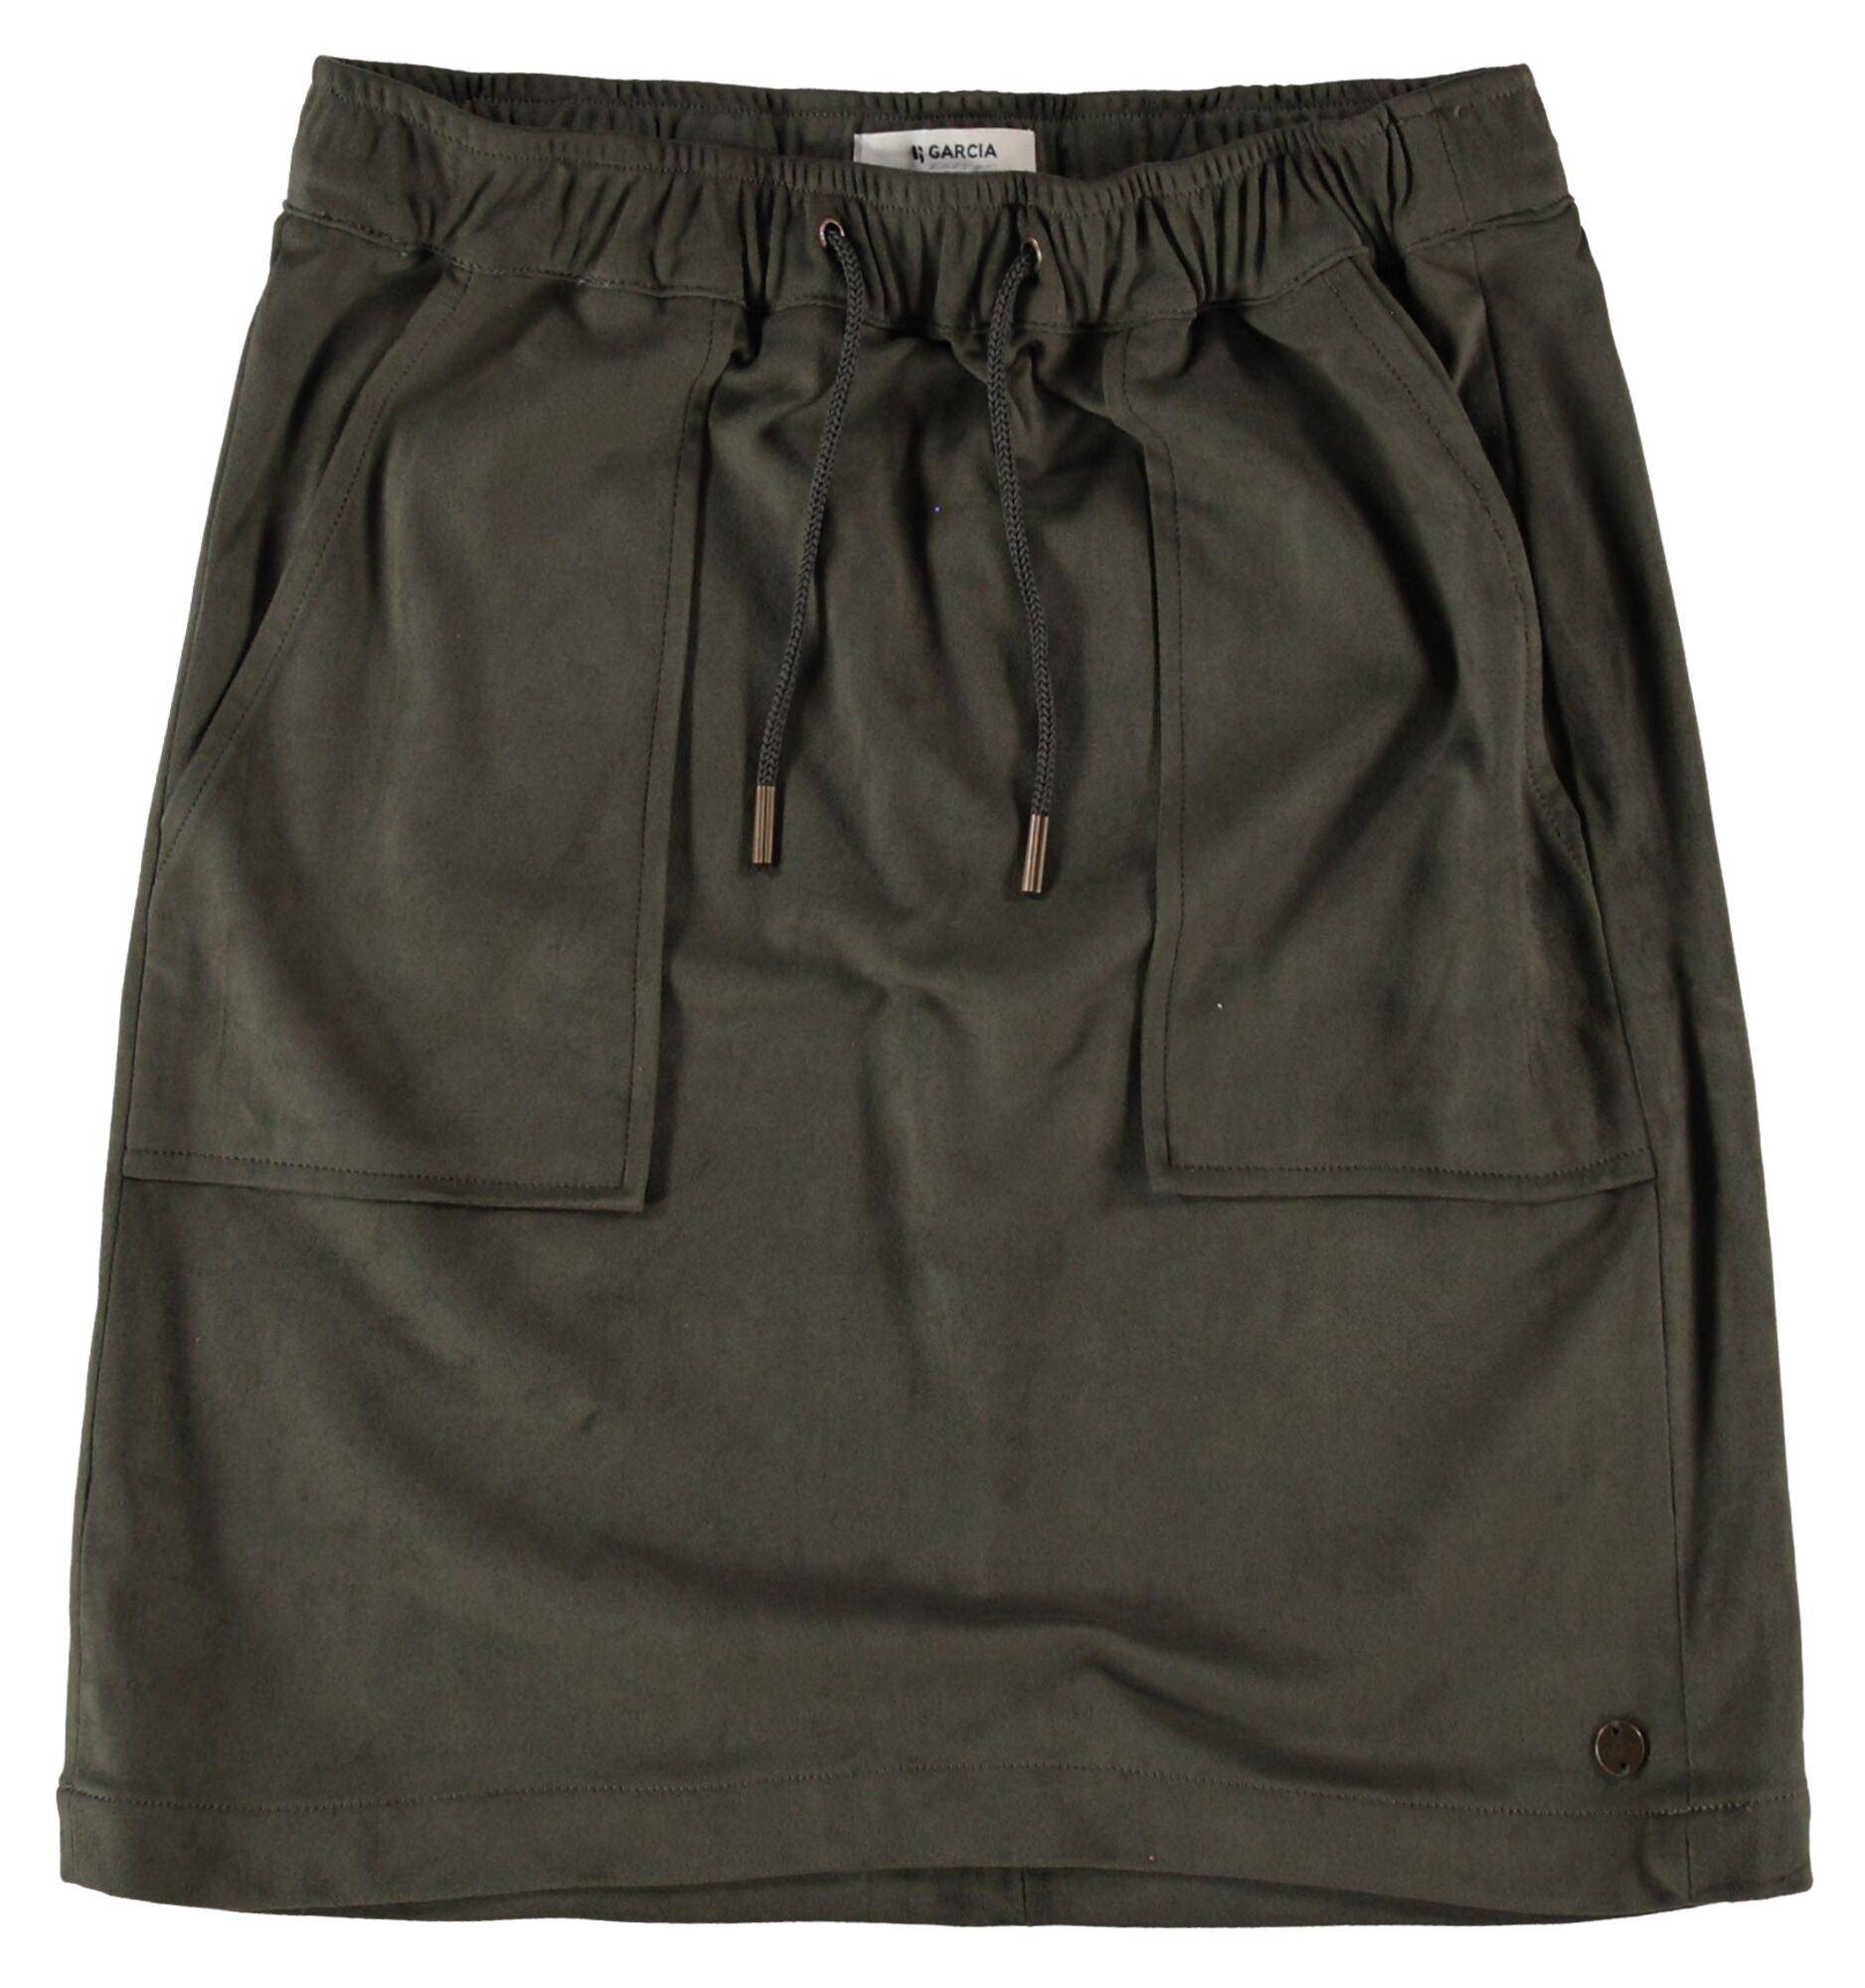 Olive Green Garcia Skirt - Your Style Your Story